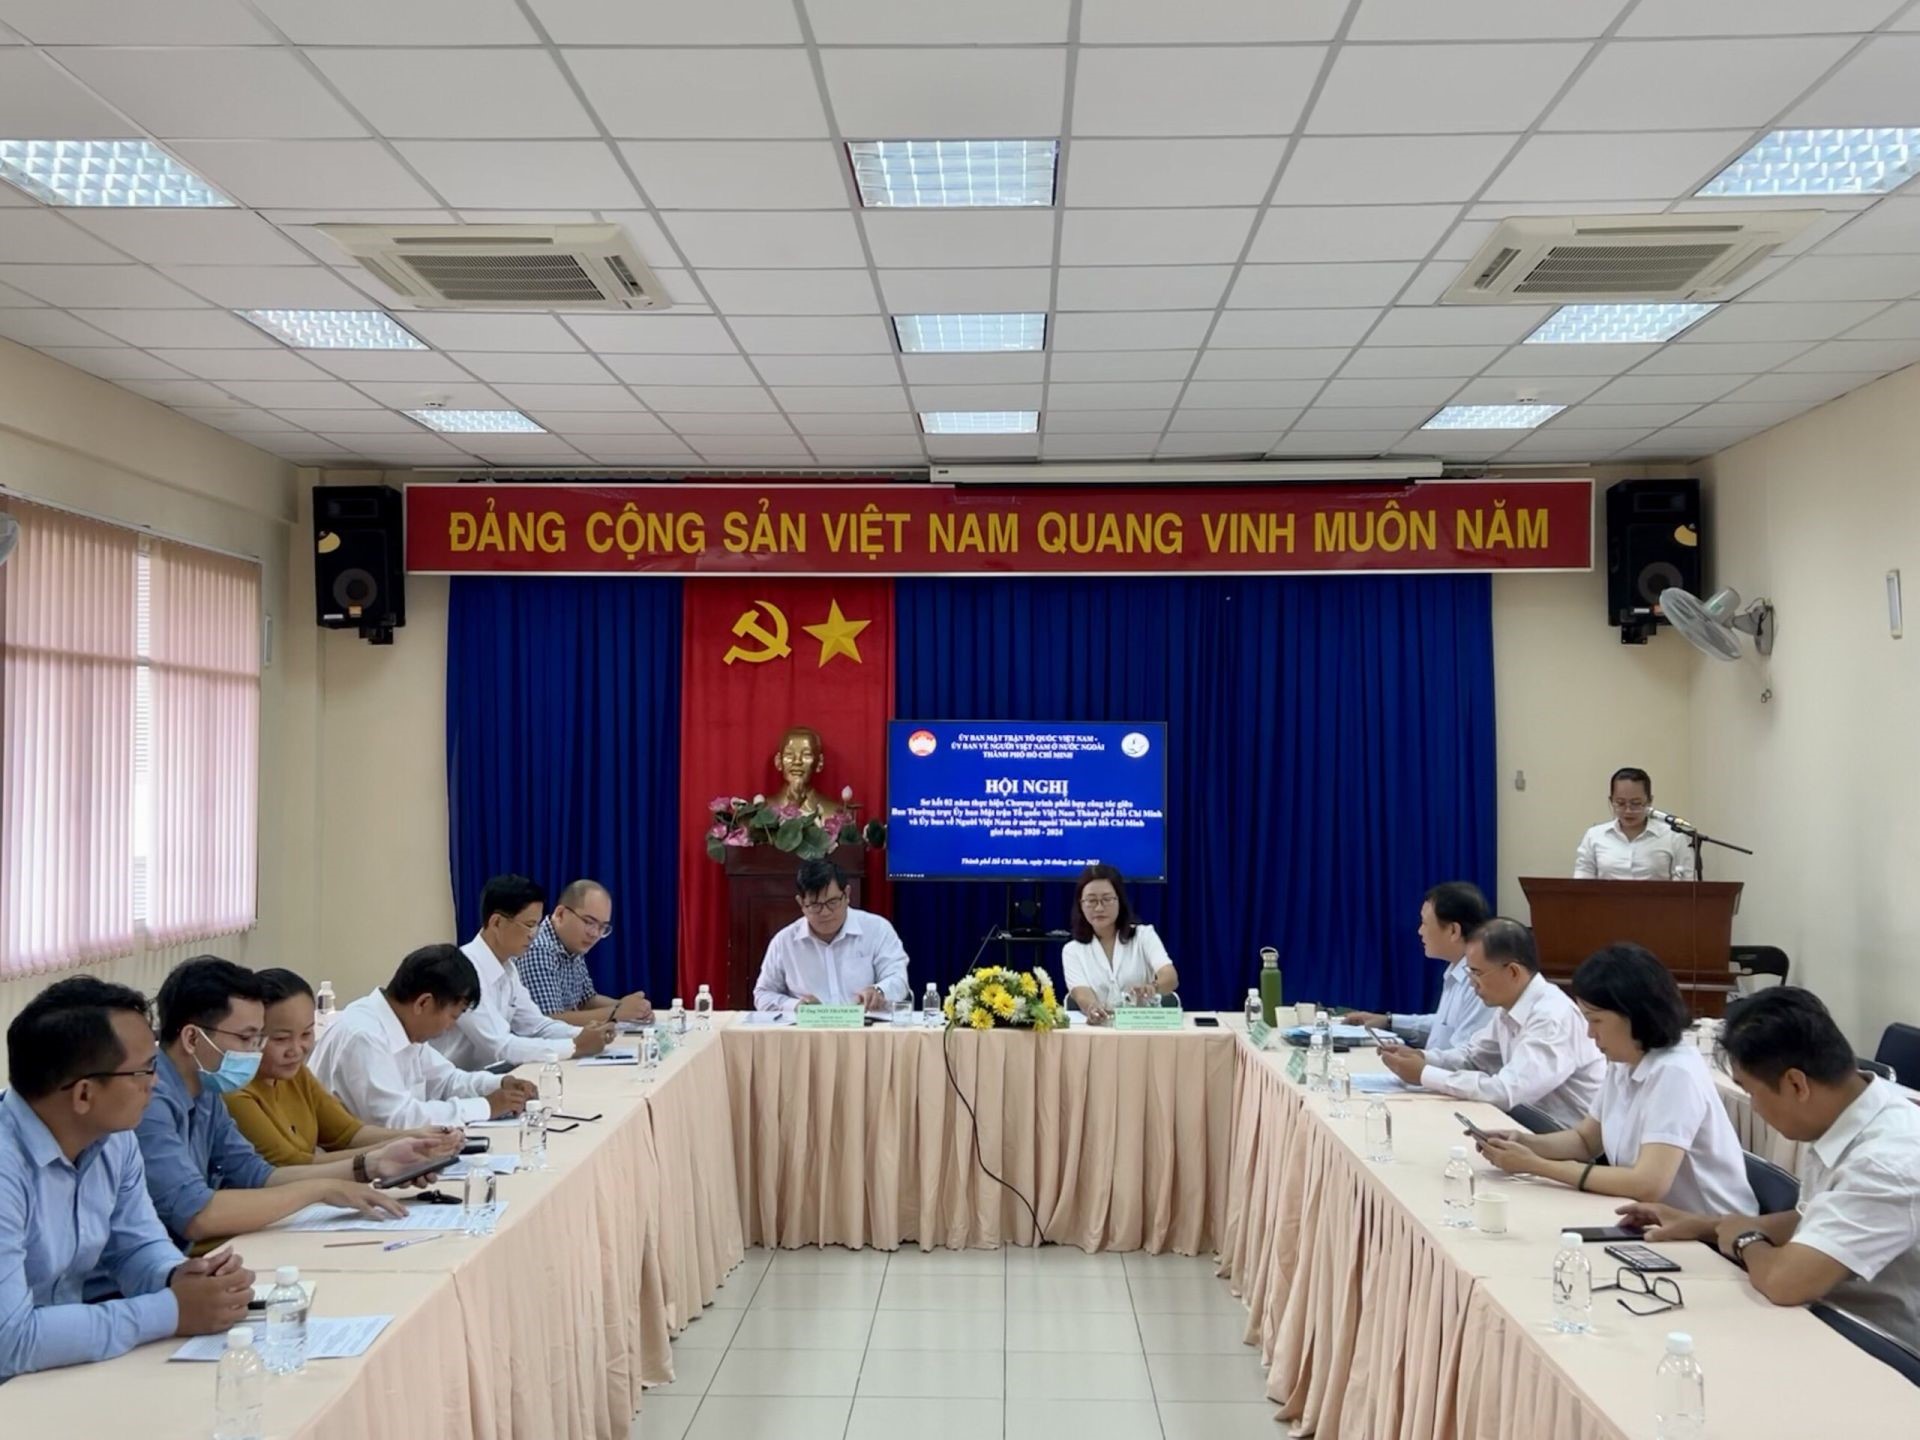 The meeting to examine the two-year execution of the cooperative program between the Committee on Overseas Vietnamese in Ho Chi Minh City and the Standing Committee of the Vietnam Fatherland Front Committee in Ho Chi Minh City.